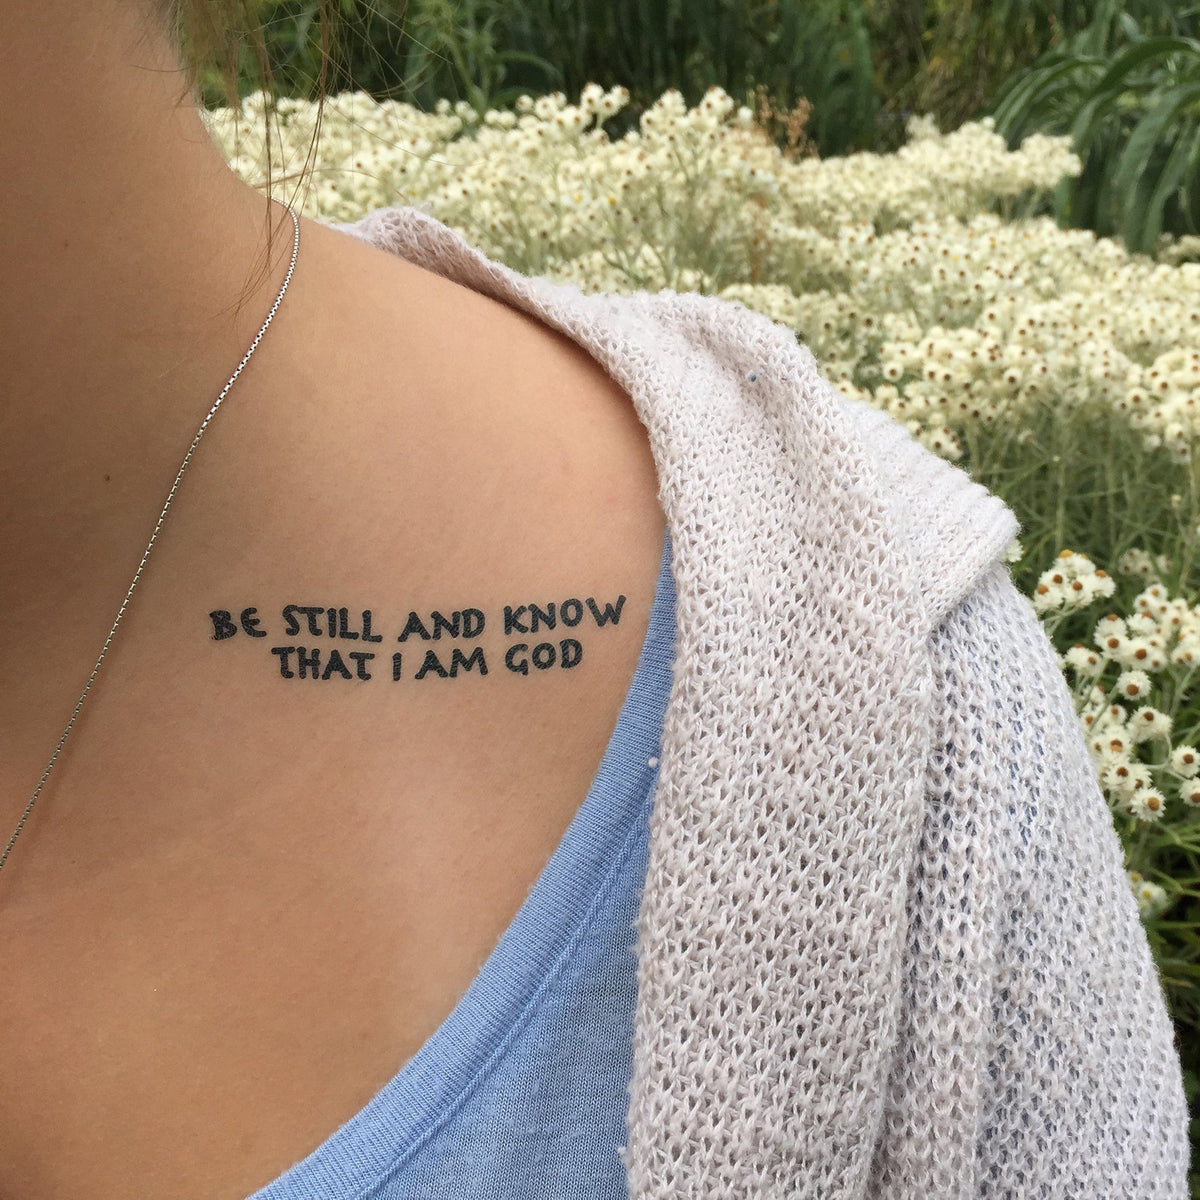 Be still and know that I am God Manifestation Tattoo – Conscious Ink